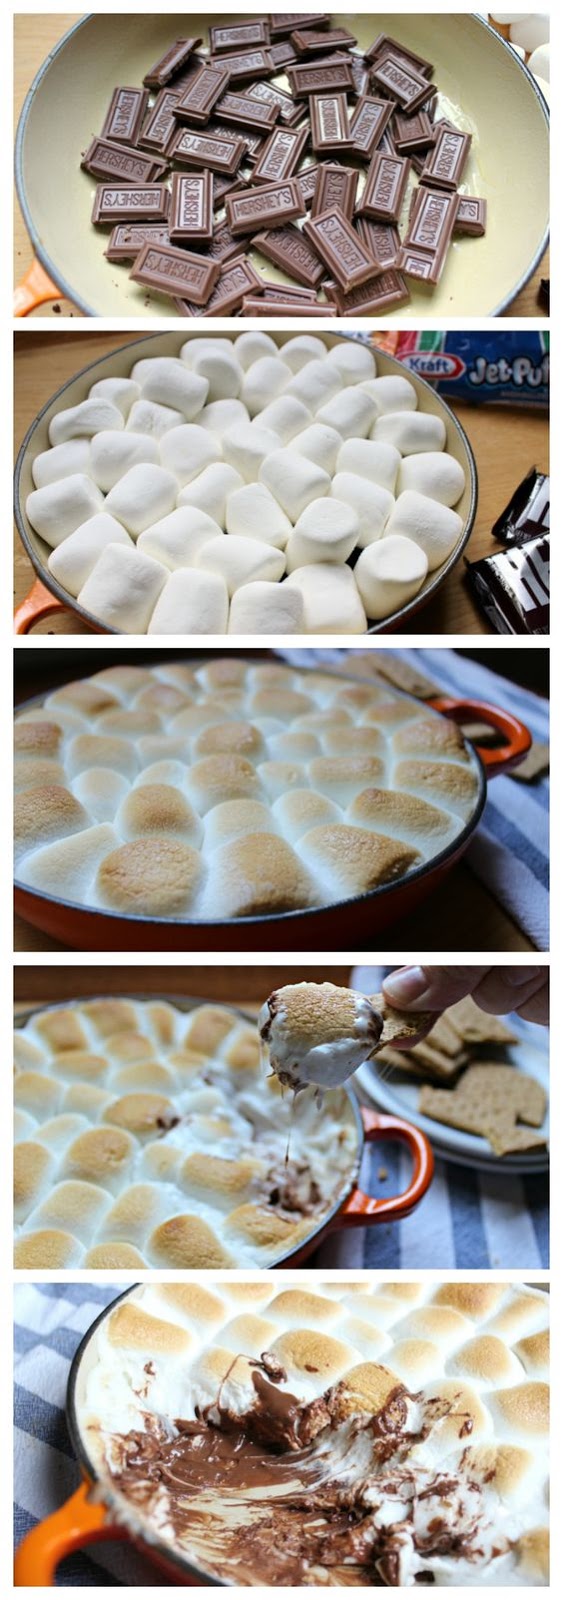 Delicious s'mores dip, made at home! Using fluffy marshmallows, Hershey's chocolate and graham crackers, this baked oven appetizer dip is perfect for family!